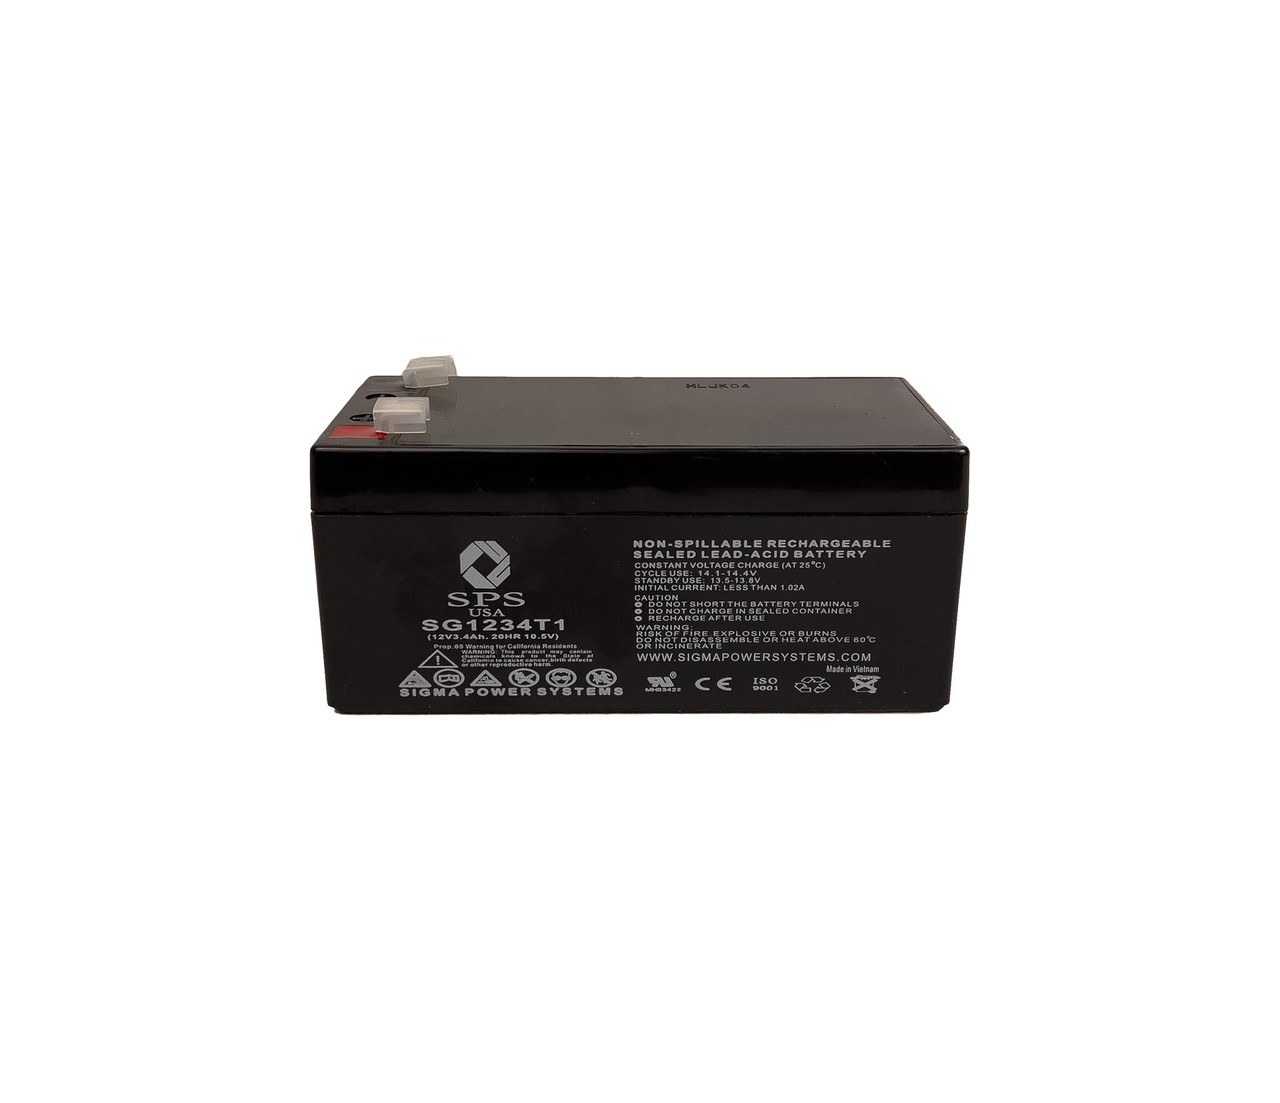 Raion Power RG1234T1 Rechargeable Compatible Replacement Battery for Black & Decker CST1000 Type 3 Cordless String Trimmer